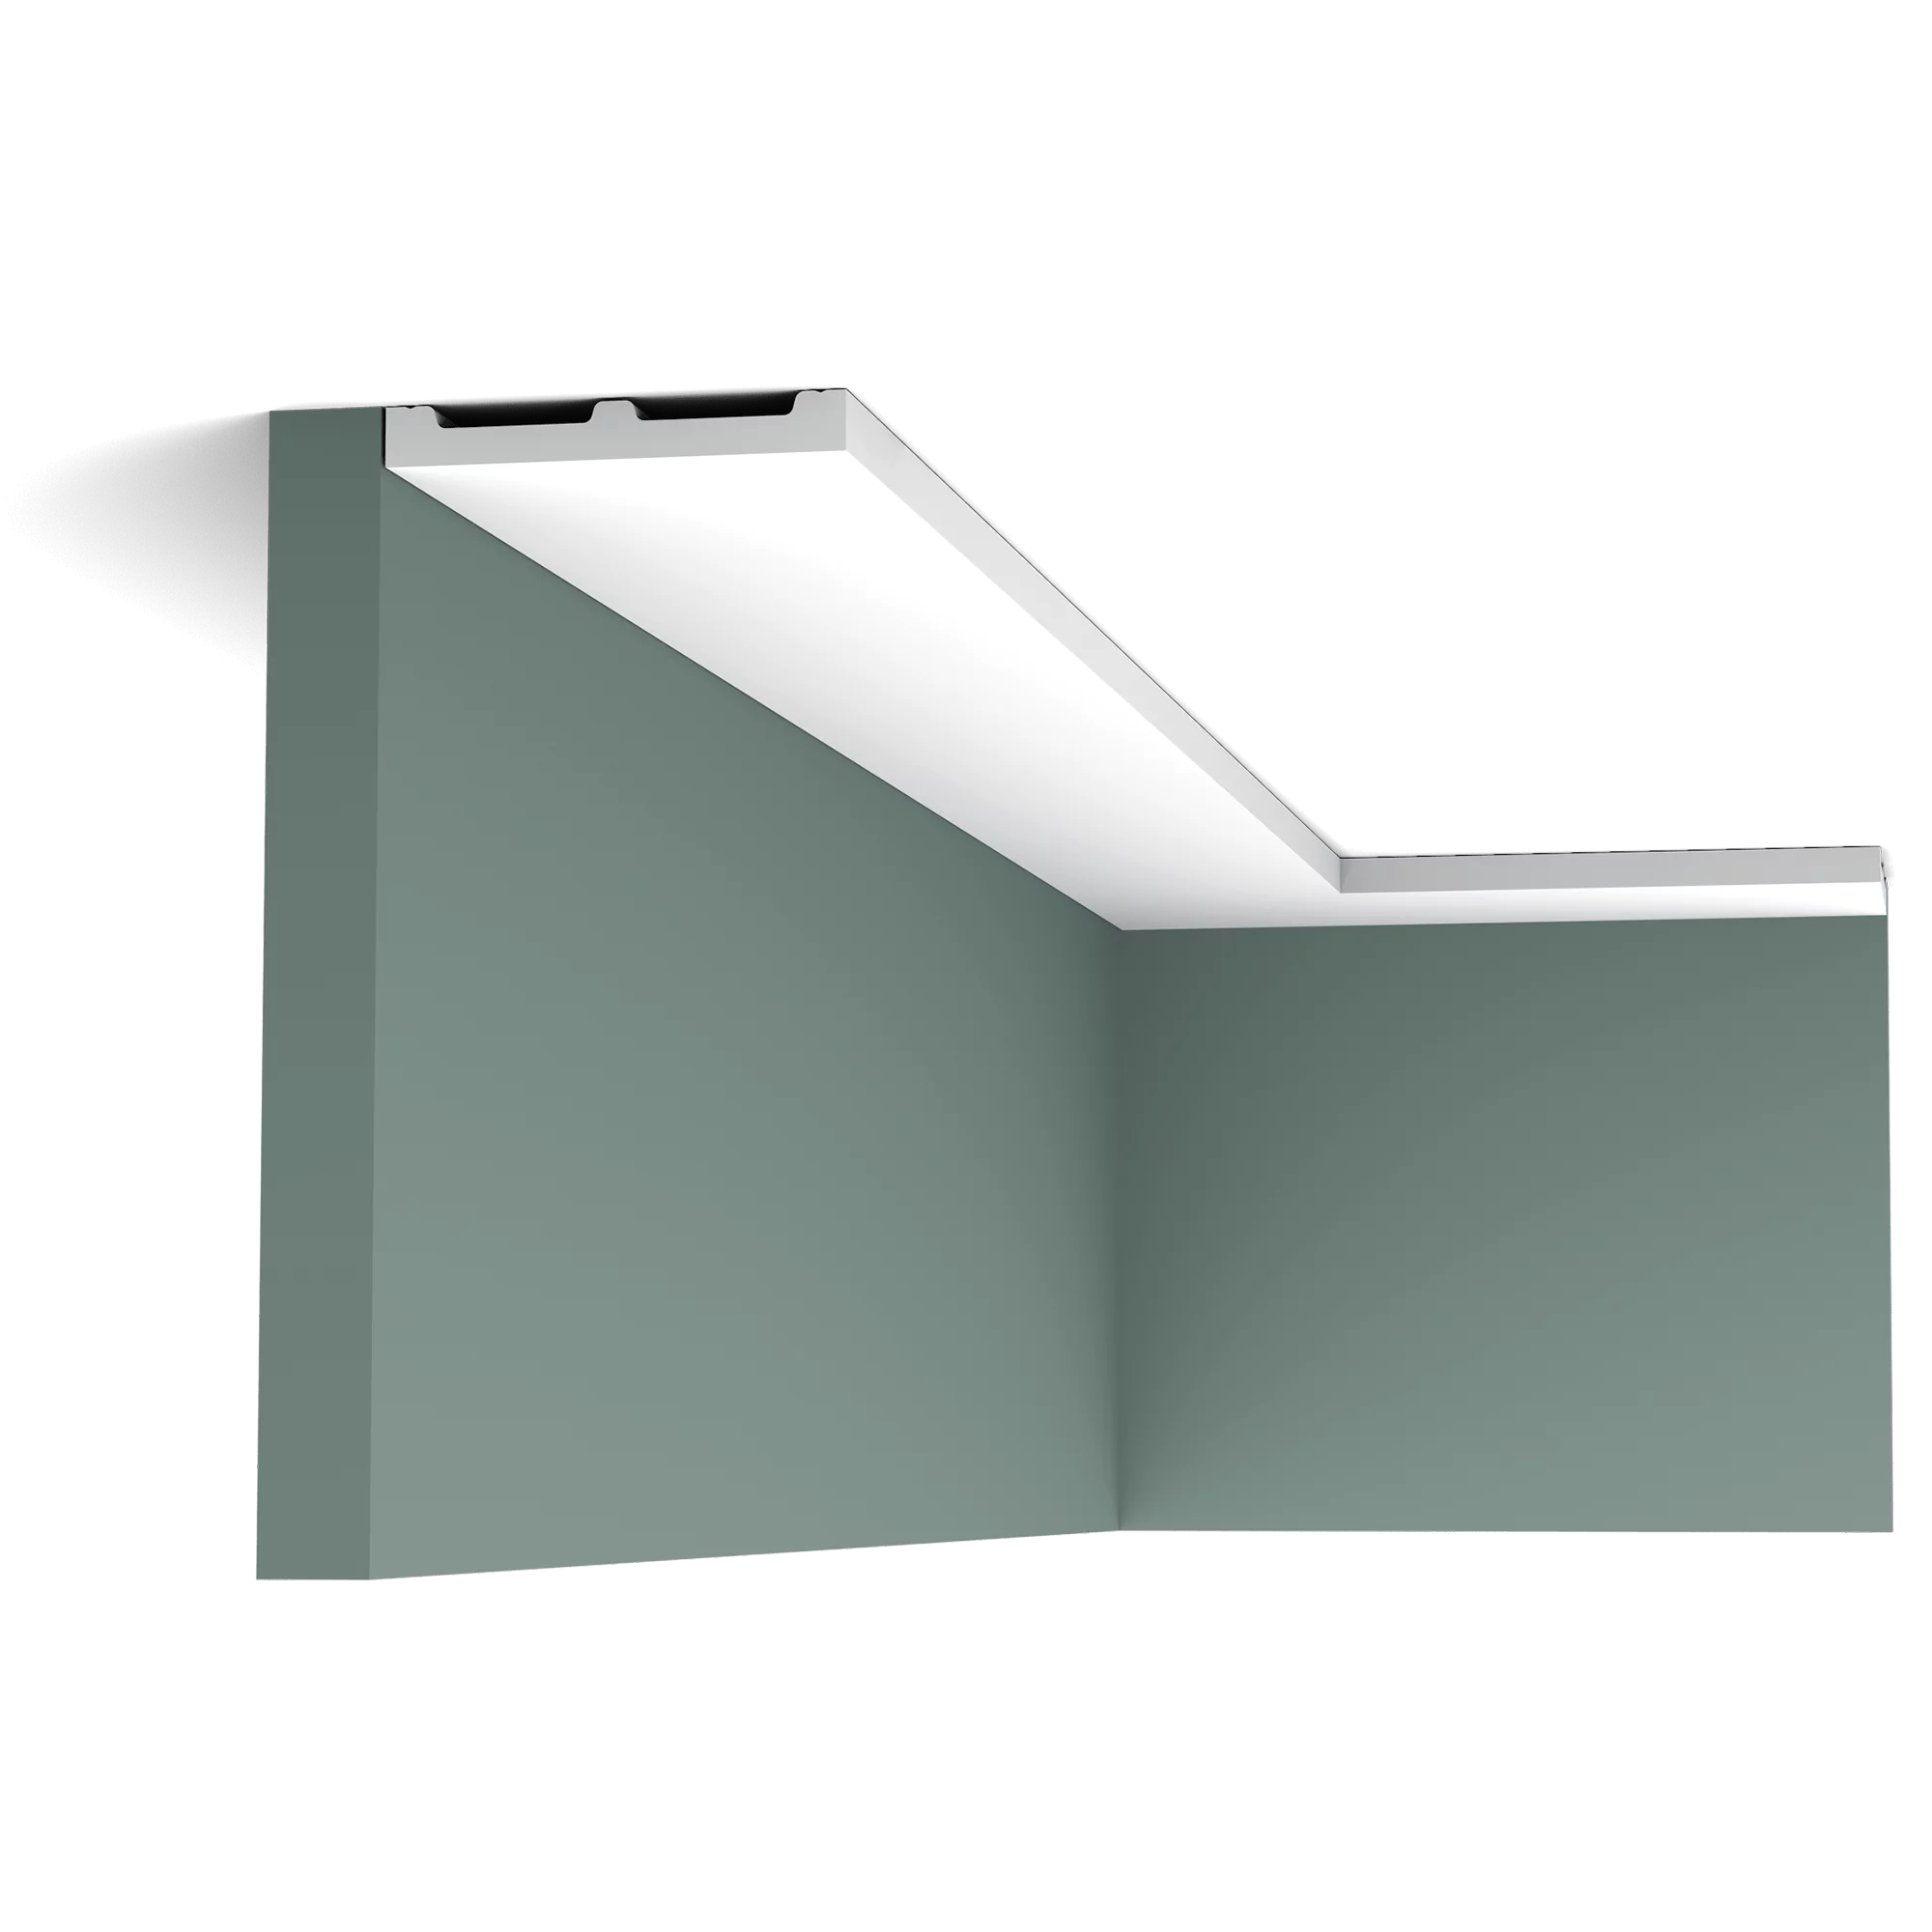 This large, simple cornice moulding is part of the SQUARE family. Use this multifunctional profile to fit your entire home with the same skirting board. All you need to do is select the correct size to fit your space.